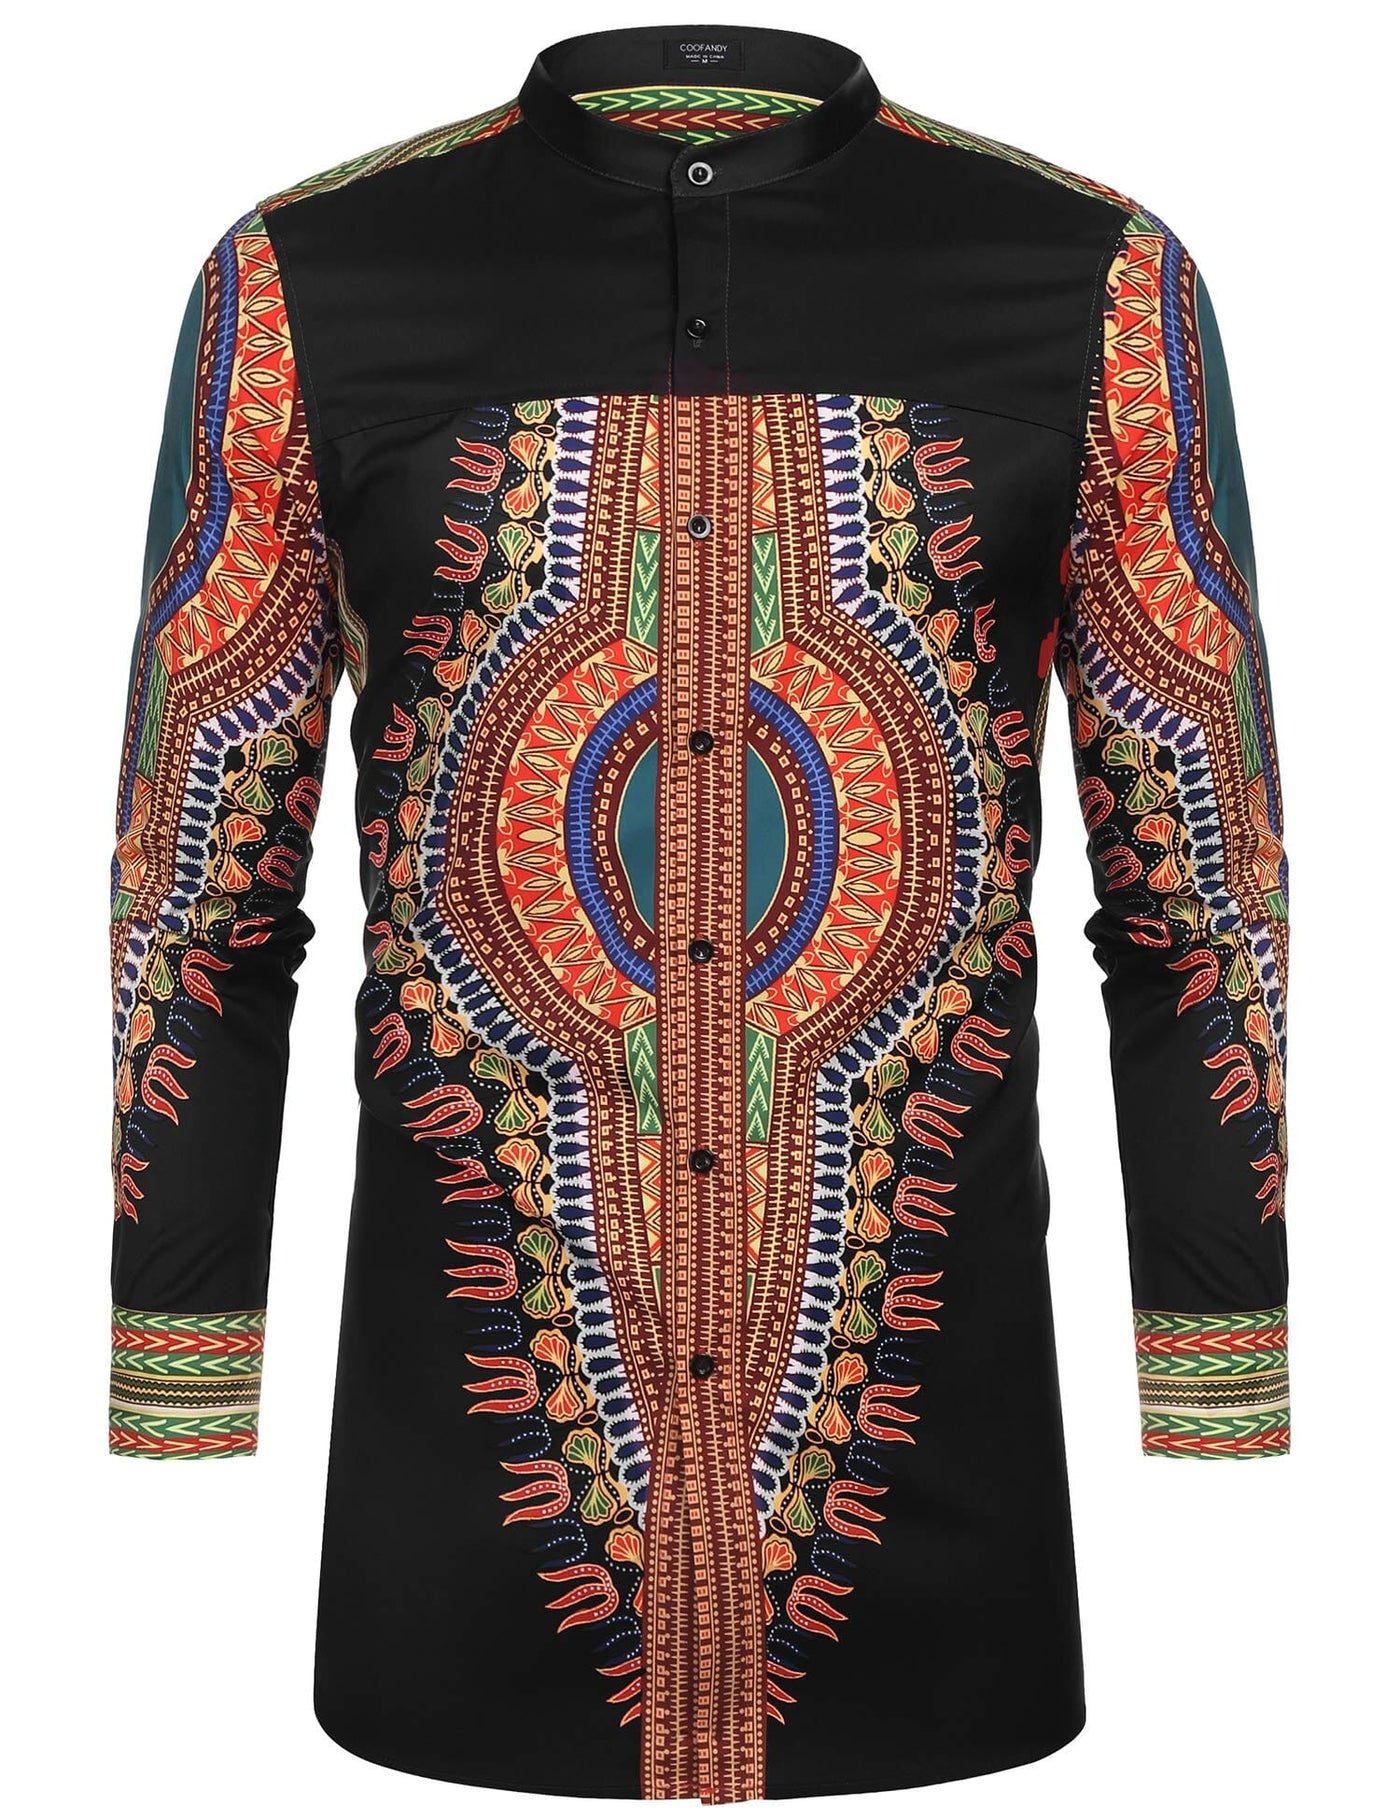 Casual Ethnic Graphic Long Shirt (US Only) Shirts COOFANDY Store Black S 